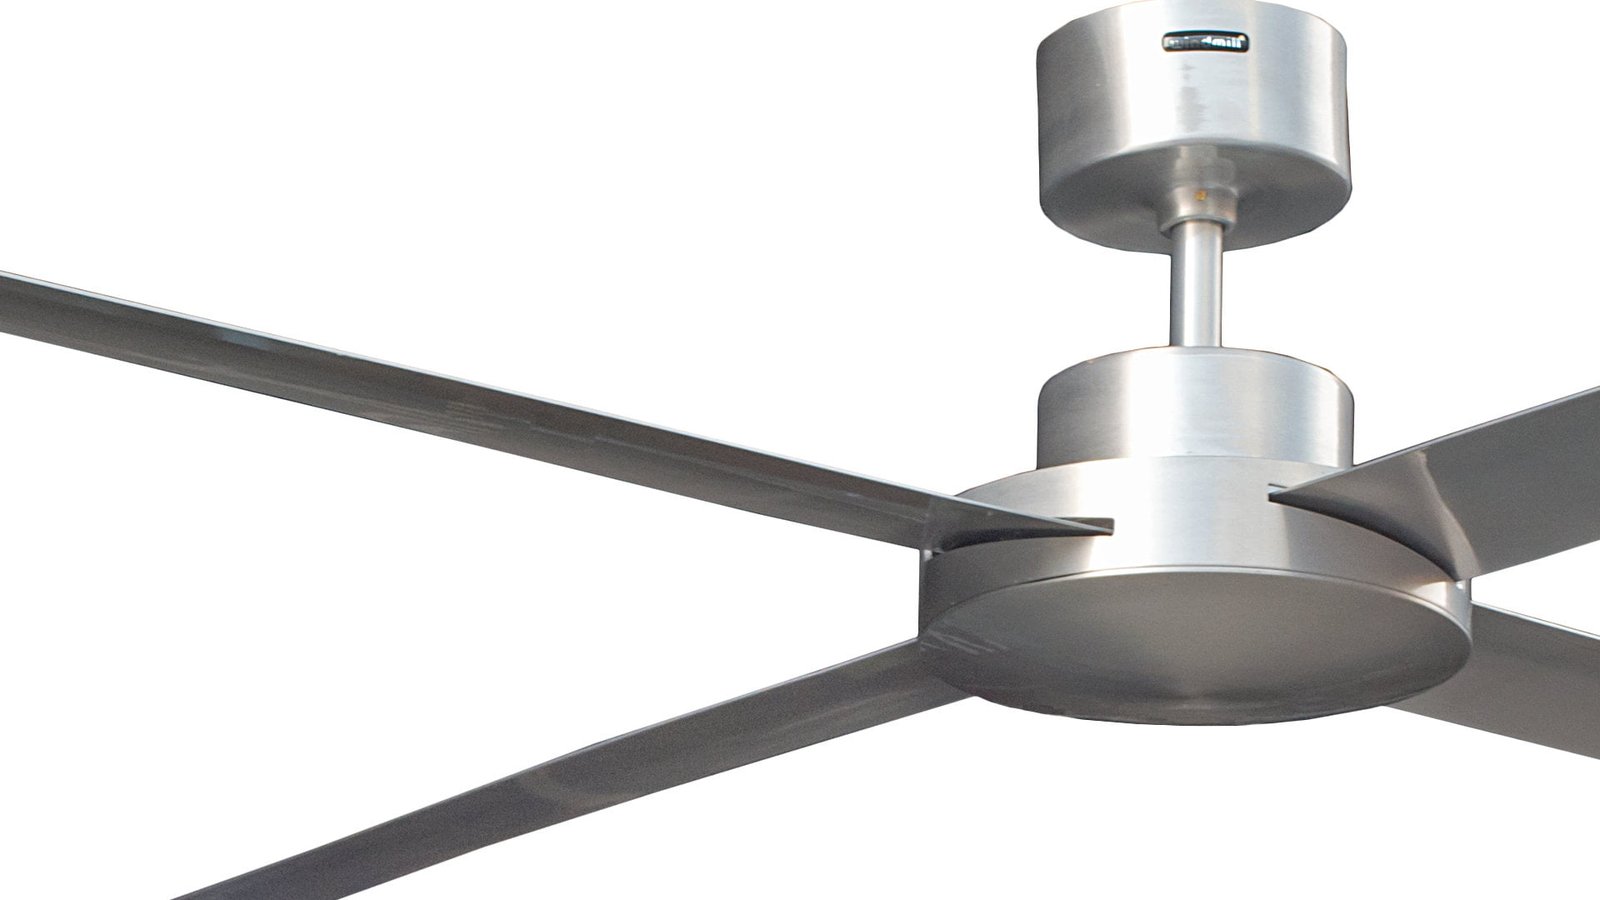 Modena brushed aluminum ceiling fan for large spaces